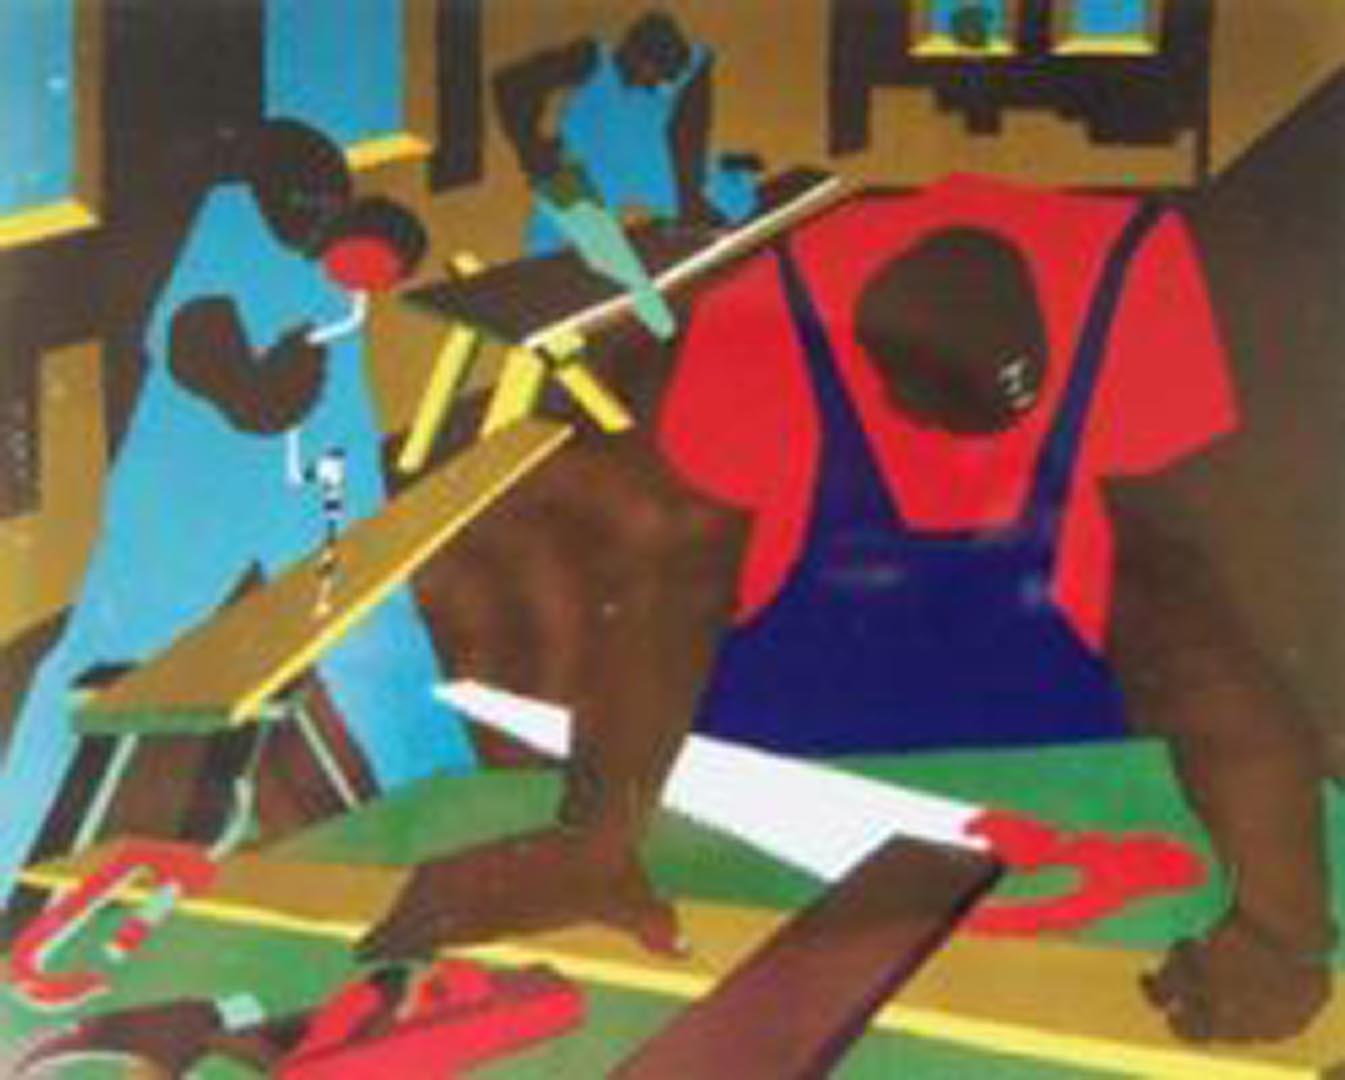 Umd Driskell Center Presents Its Perspective On African-American Art Post-1950